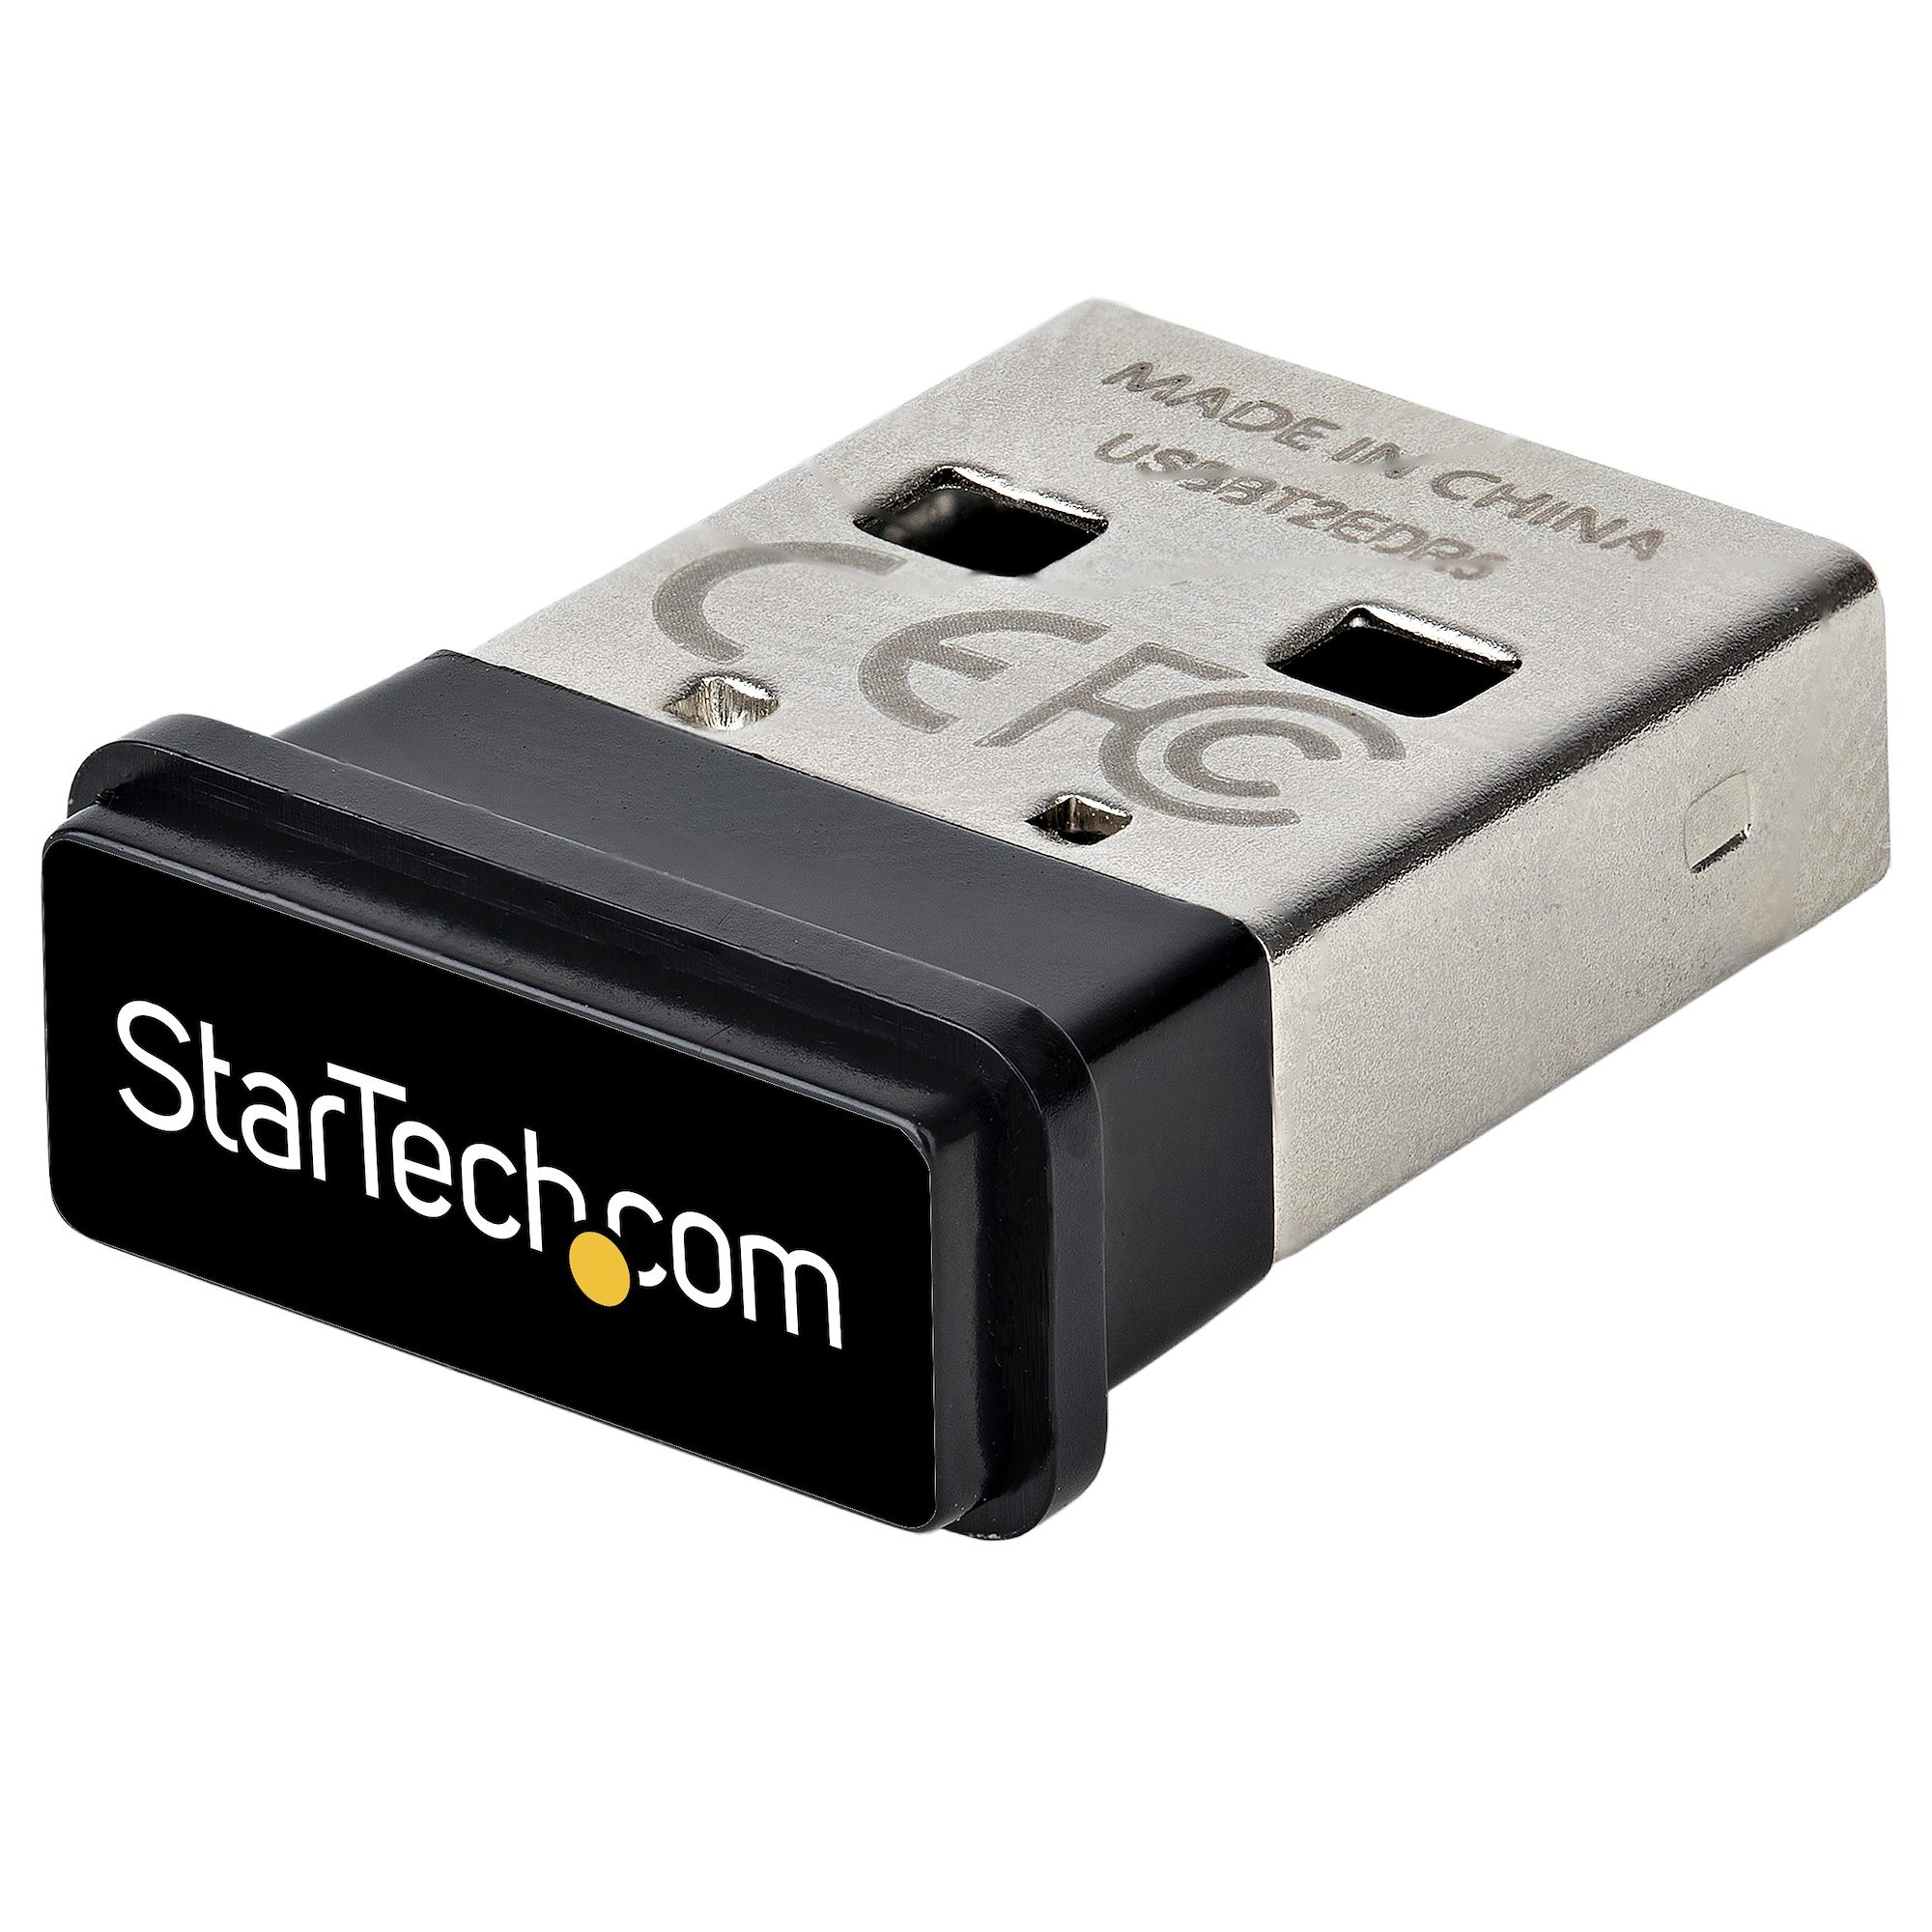 StarTech.com Bluetooth 5.0 Adapter, USB Bluetooth Dongle Receiver for PC/Laptop, Range 33ft/10m - Add functionality/replace a broken built-in Bluetooth radio using this USB Dongle - Use this USB Bluetooth adapter for data transfer/audio ...